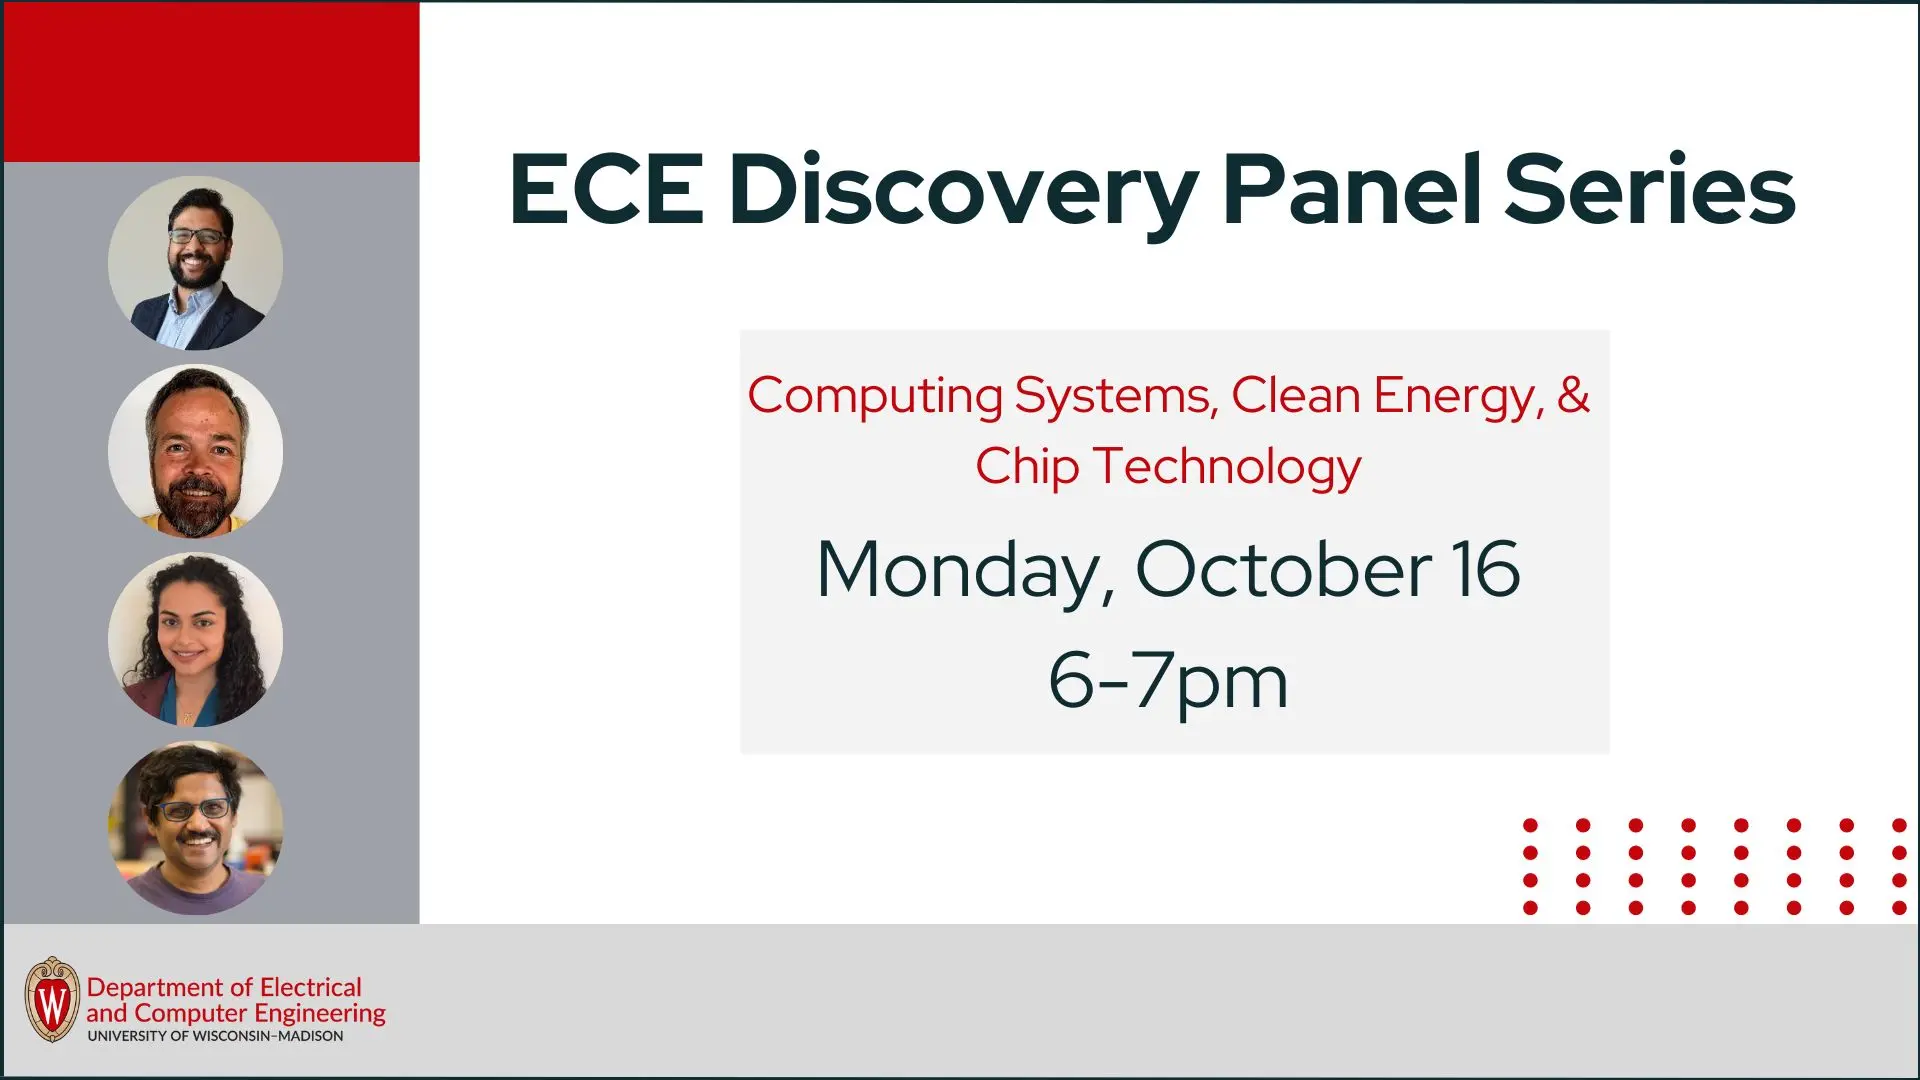 ECE Discovery Panel Series - Computing Systems, Clean Energy, & Chip Technology, Monday, October 16, 6-7 pm